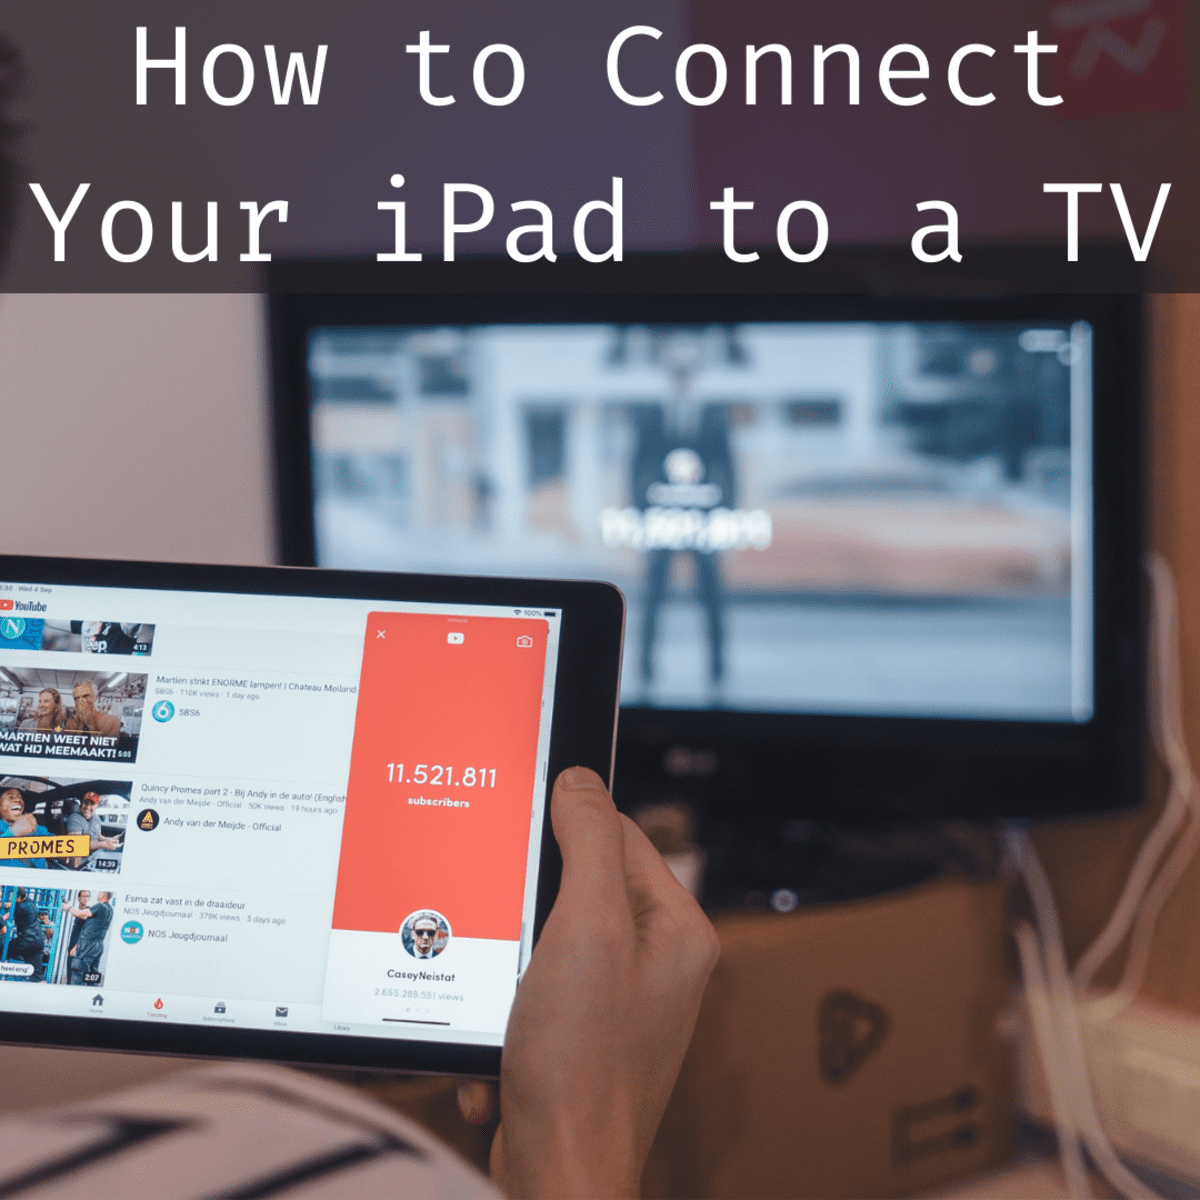 tyran Reorganisere Verdensvindue How to Connect an iPad to TV With HDMI or Wireless Airplay - TurboFuture